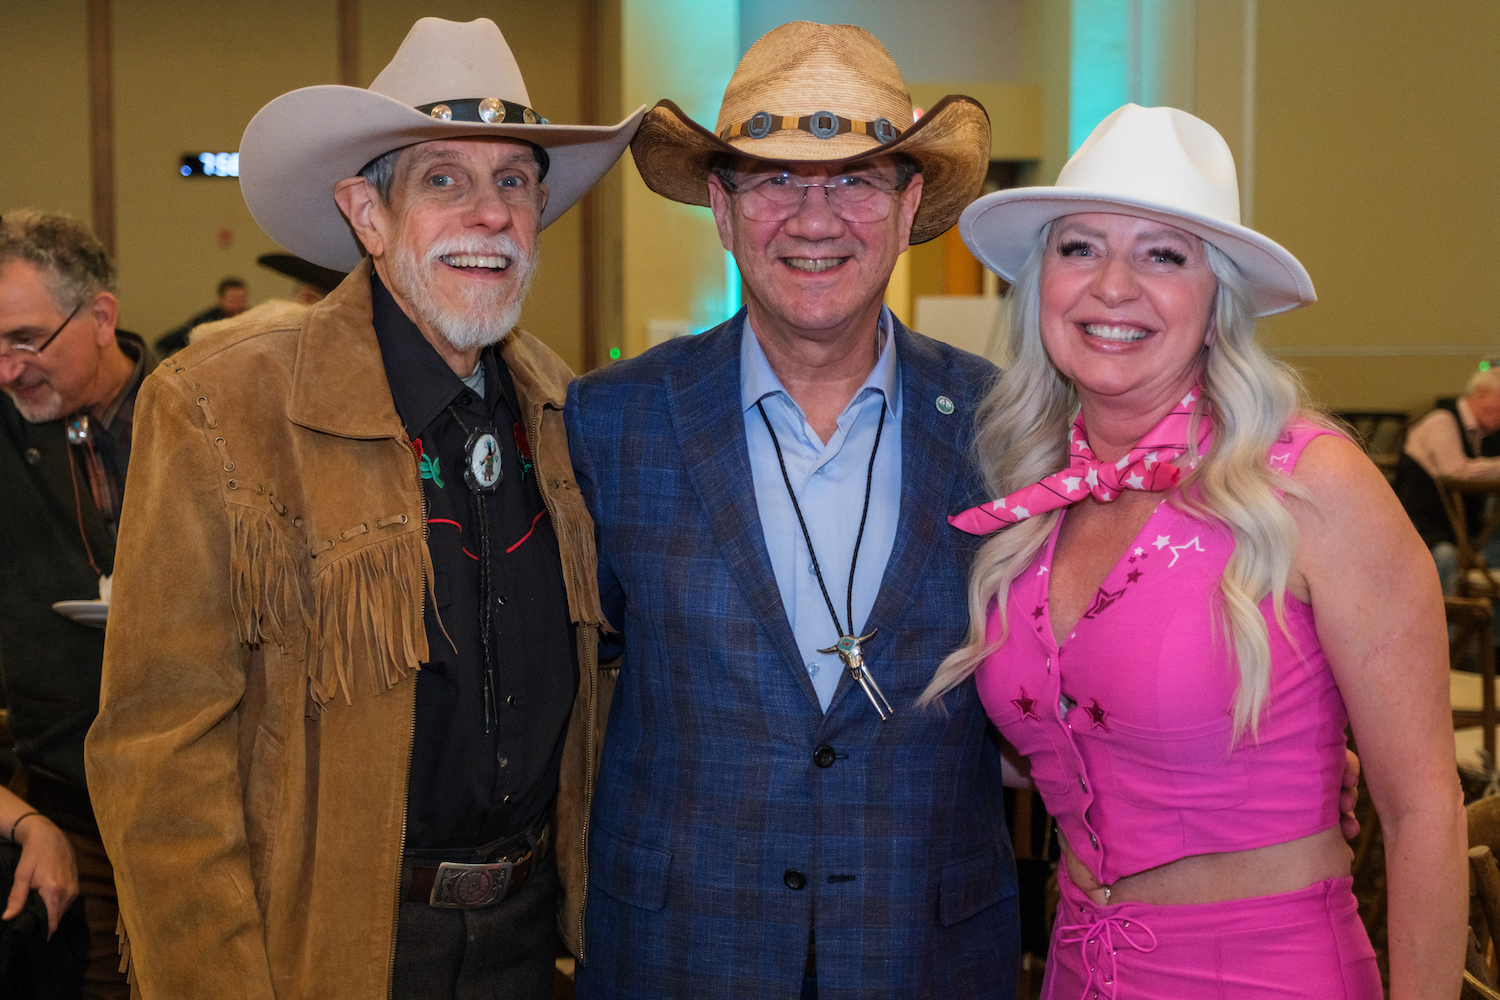 WVSOM President James Nemitz, center, joins Dr. Bob Foster, at left, and guest for a photo at WVSOM's Wild West Benefit to Bob Foster, who recently retired after 45 years of service to the school,